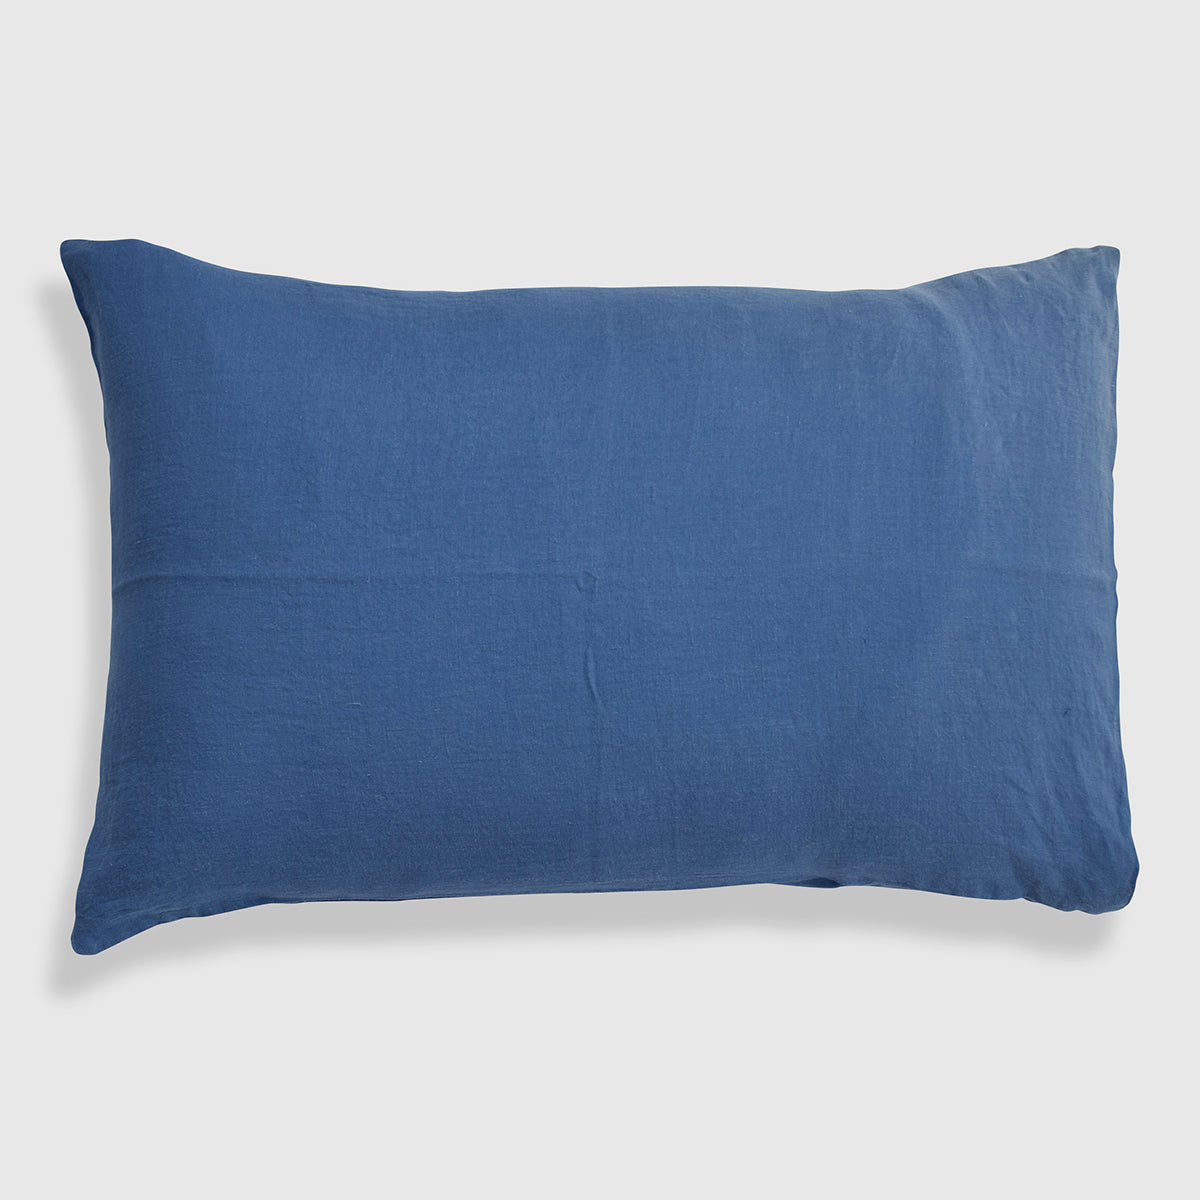 Linge Particulier Atlantic Blue Standard Linen Pillowcase Sham for a colorful linen bedding look in electric blue - Collyer's Mansion